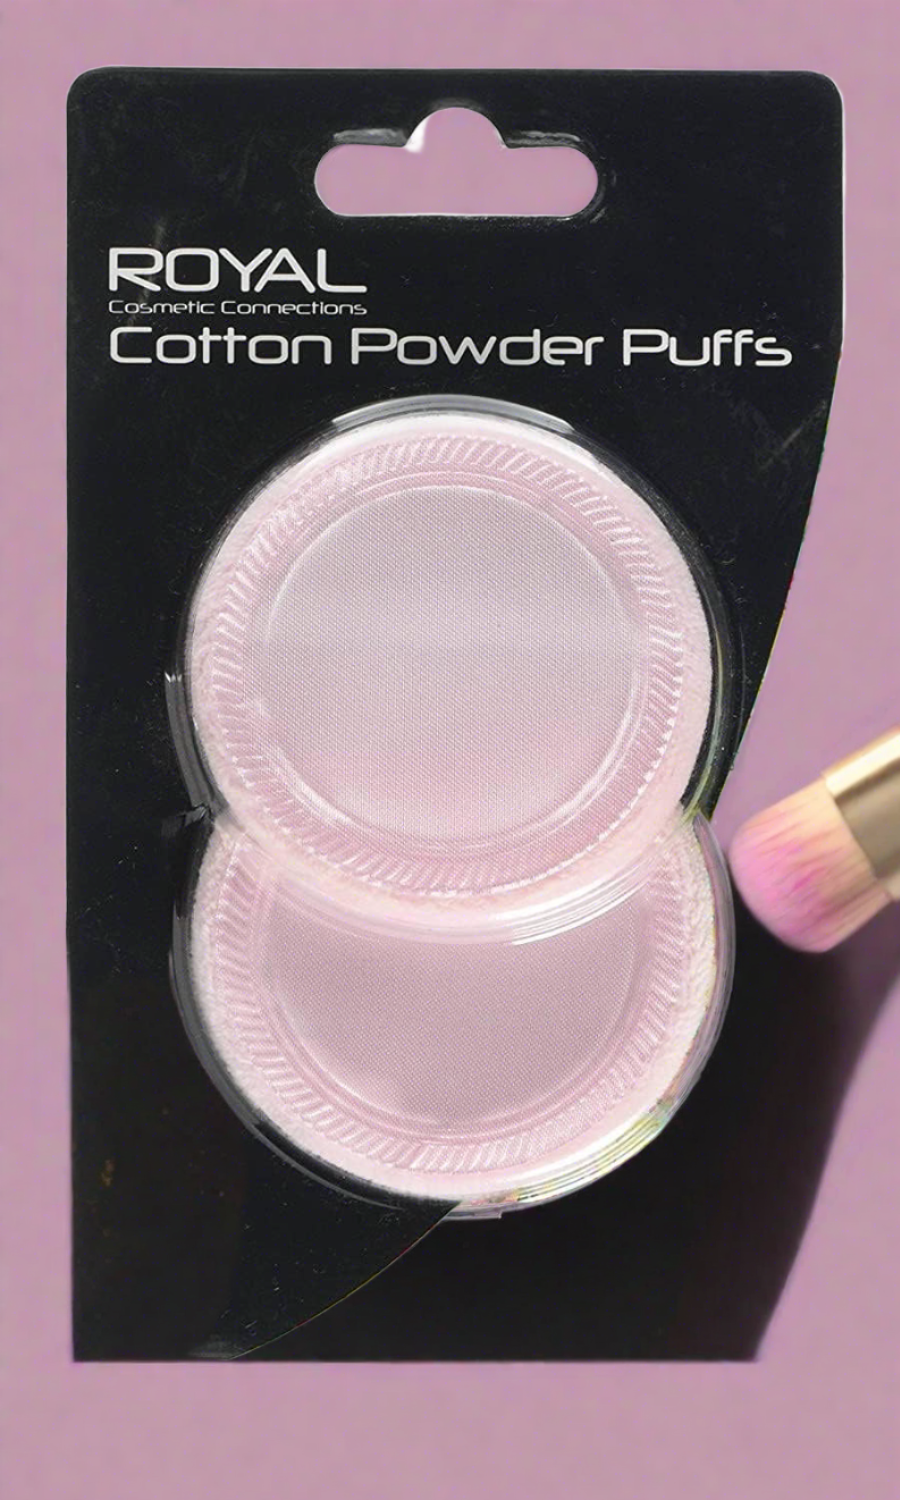 Cotton Face Powder Puffs Pack of 2 by Royal Cosmetics | Merthyr Tydfil | Why Not Shop Online